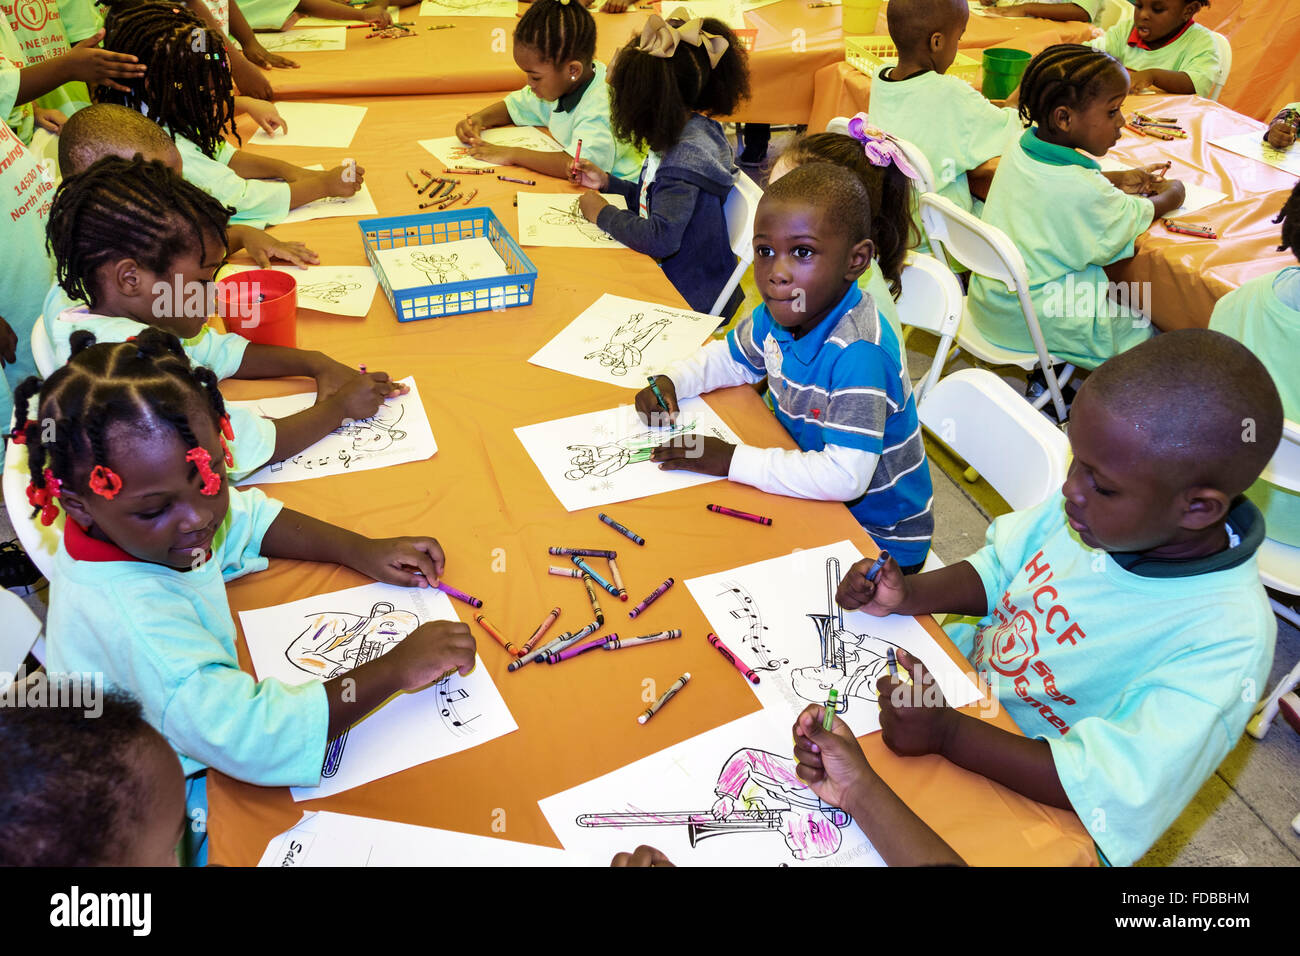 Miami Florida,Book Fair International,Miami Dade College campus,literary,festival,annual arts & crafts,tent,coloring,drawing,daycare,student students Stock Photo